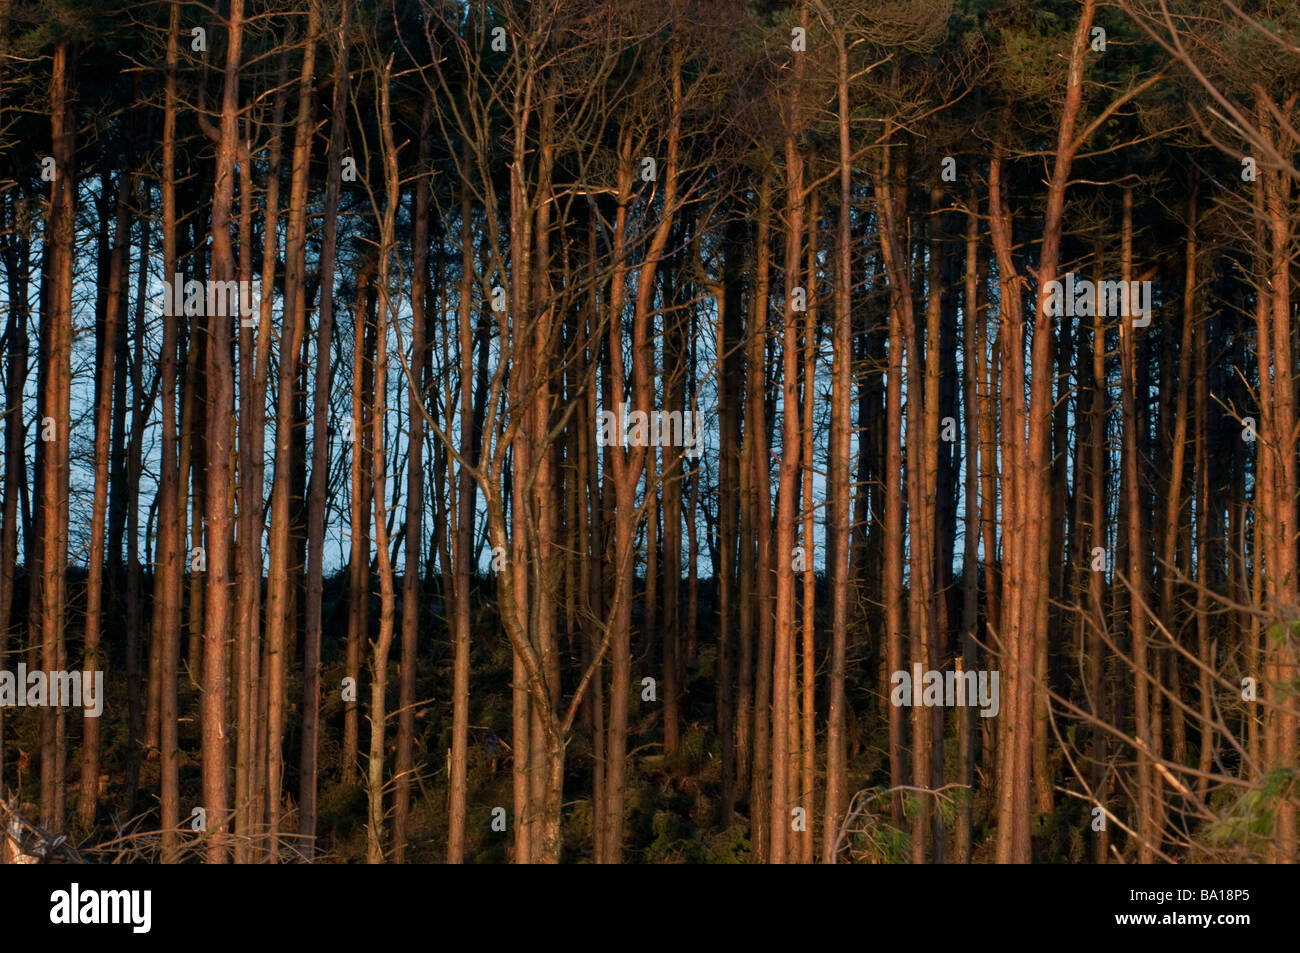 Forestry plantation at Stainburn Forest in the Washburn Valley near Harrogate Yorkshire England Stock Photo